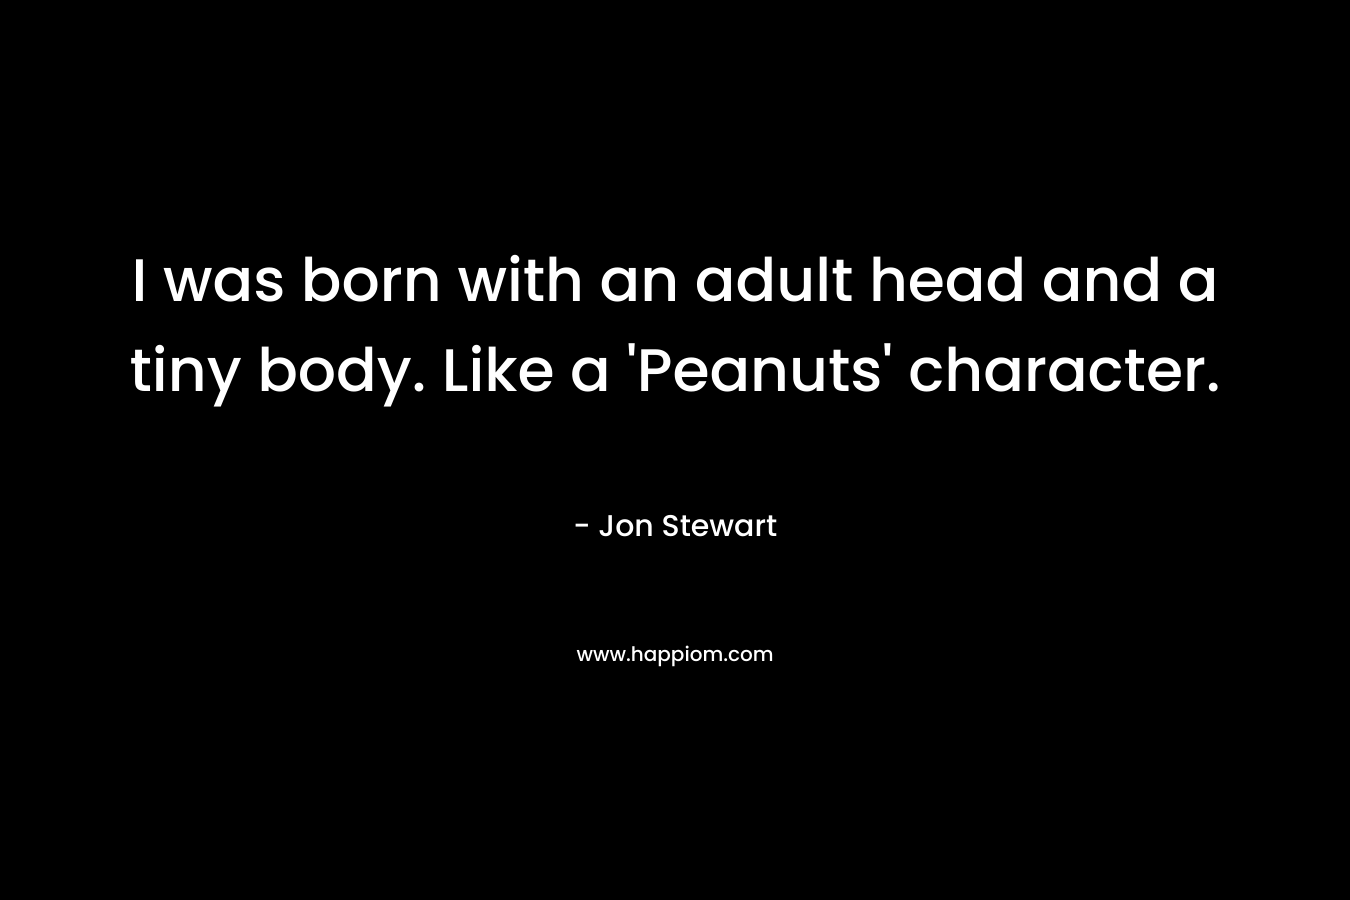 I was born with an adult head and a tiny body. Like a 'Peanuts' character.